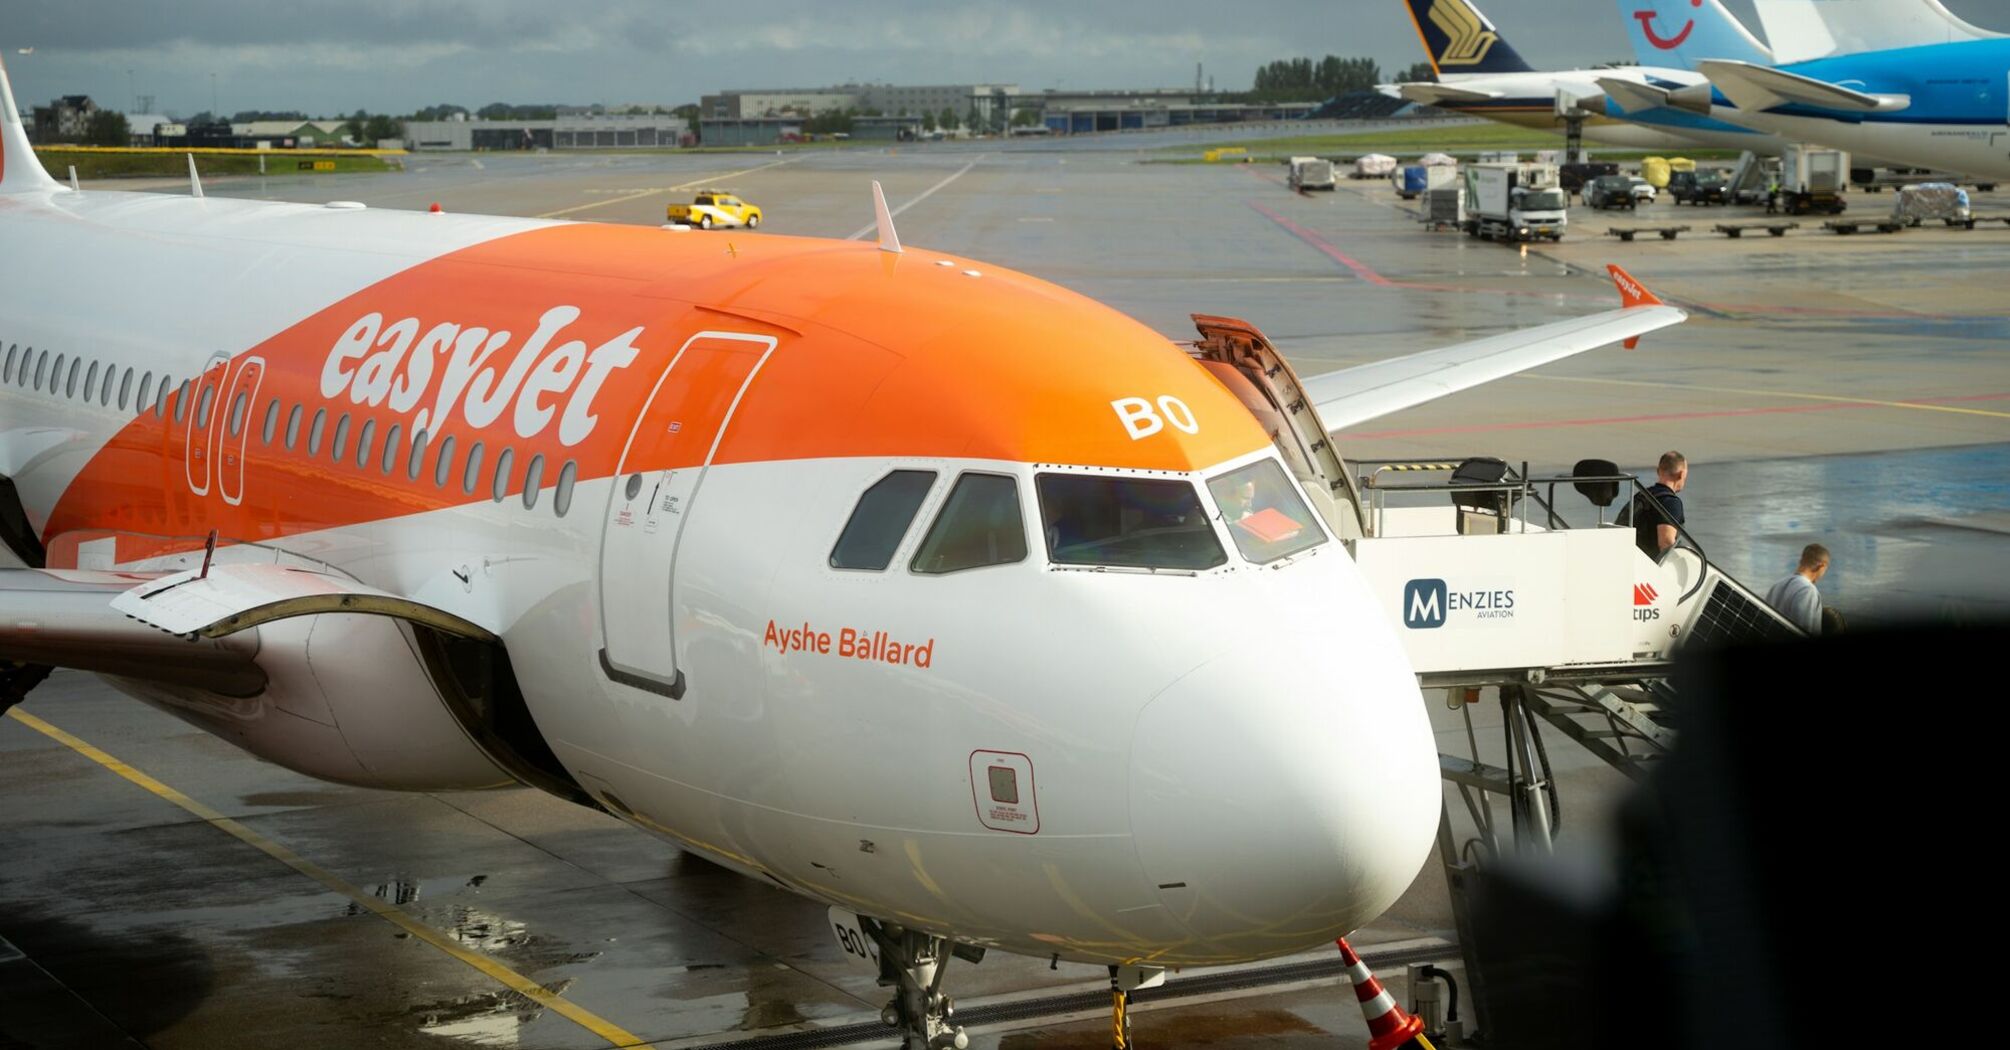 easyJet airplane at an airport gate